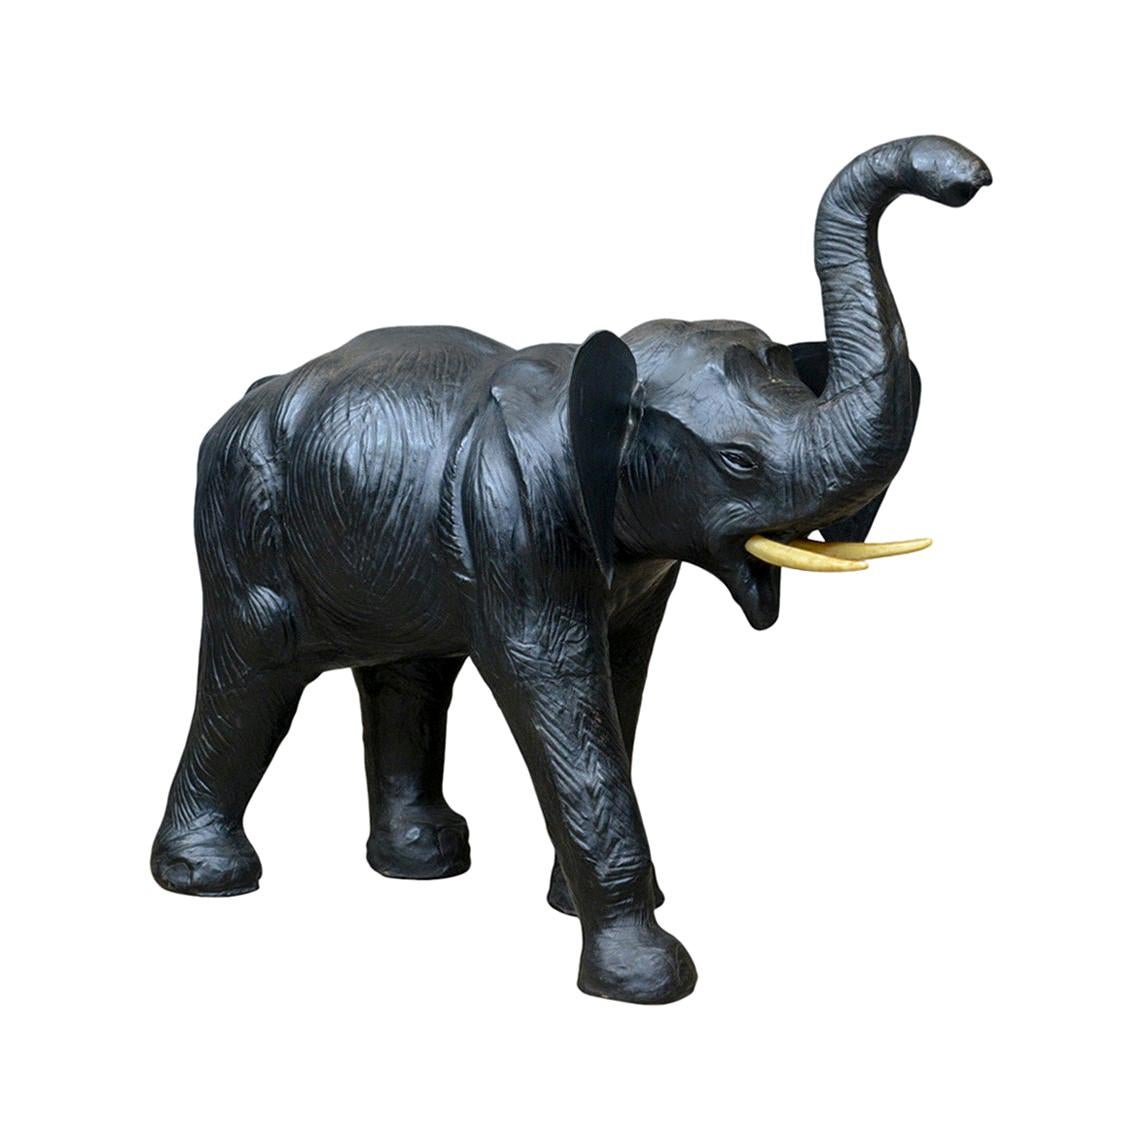 Large Vintage Leather Elephant Sculpture, Tall Model, Mid-20th Century For Sale